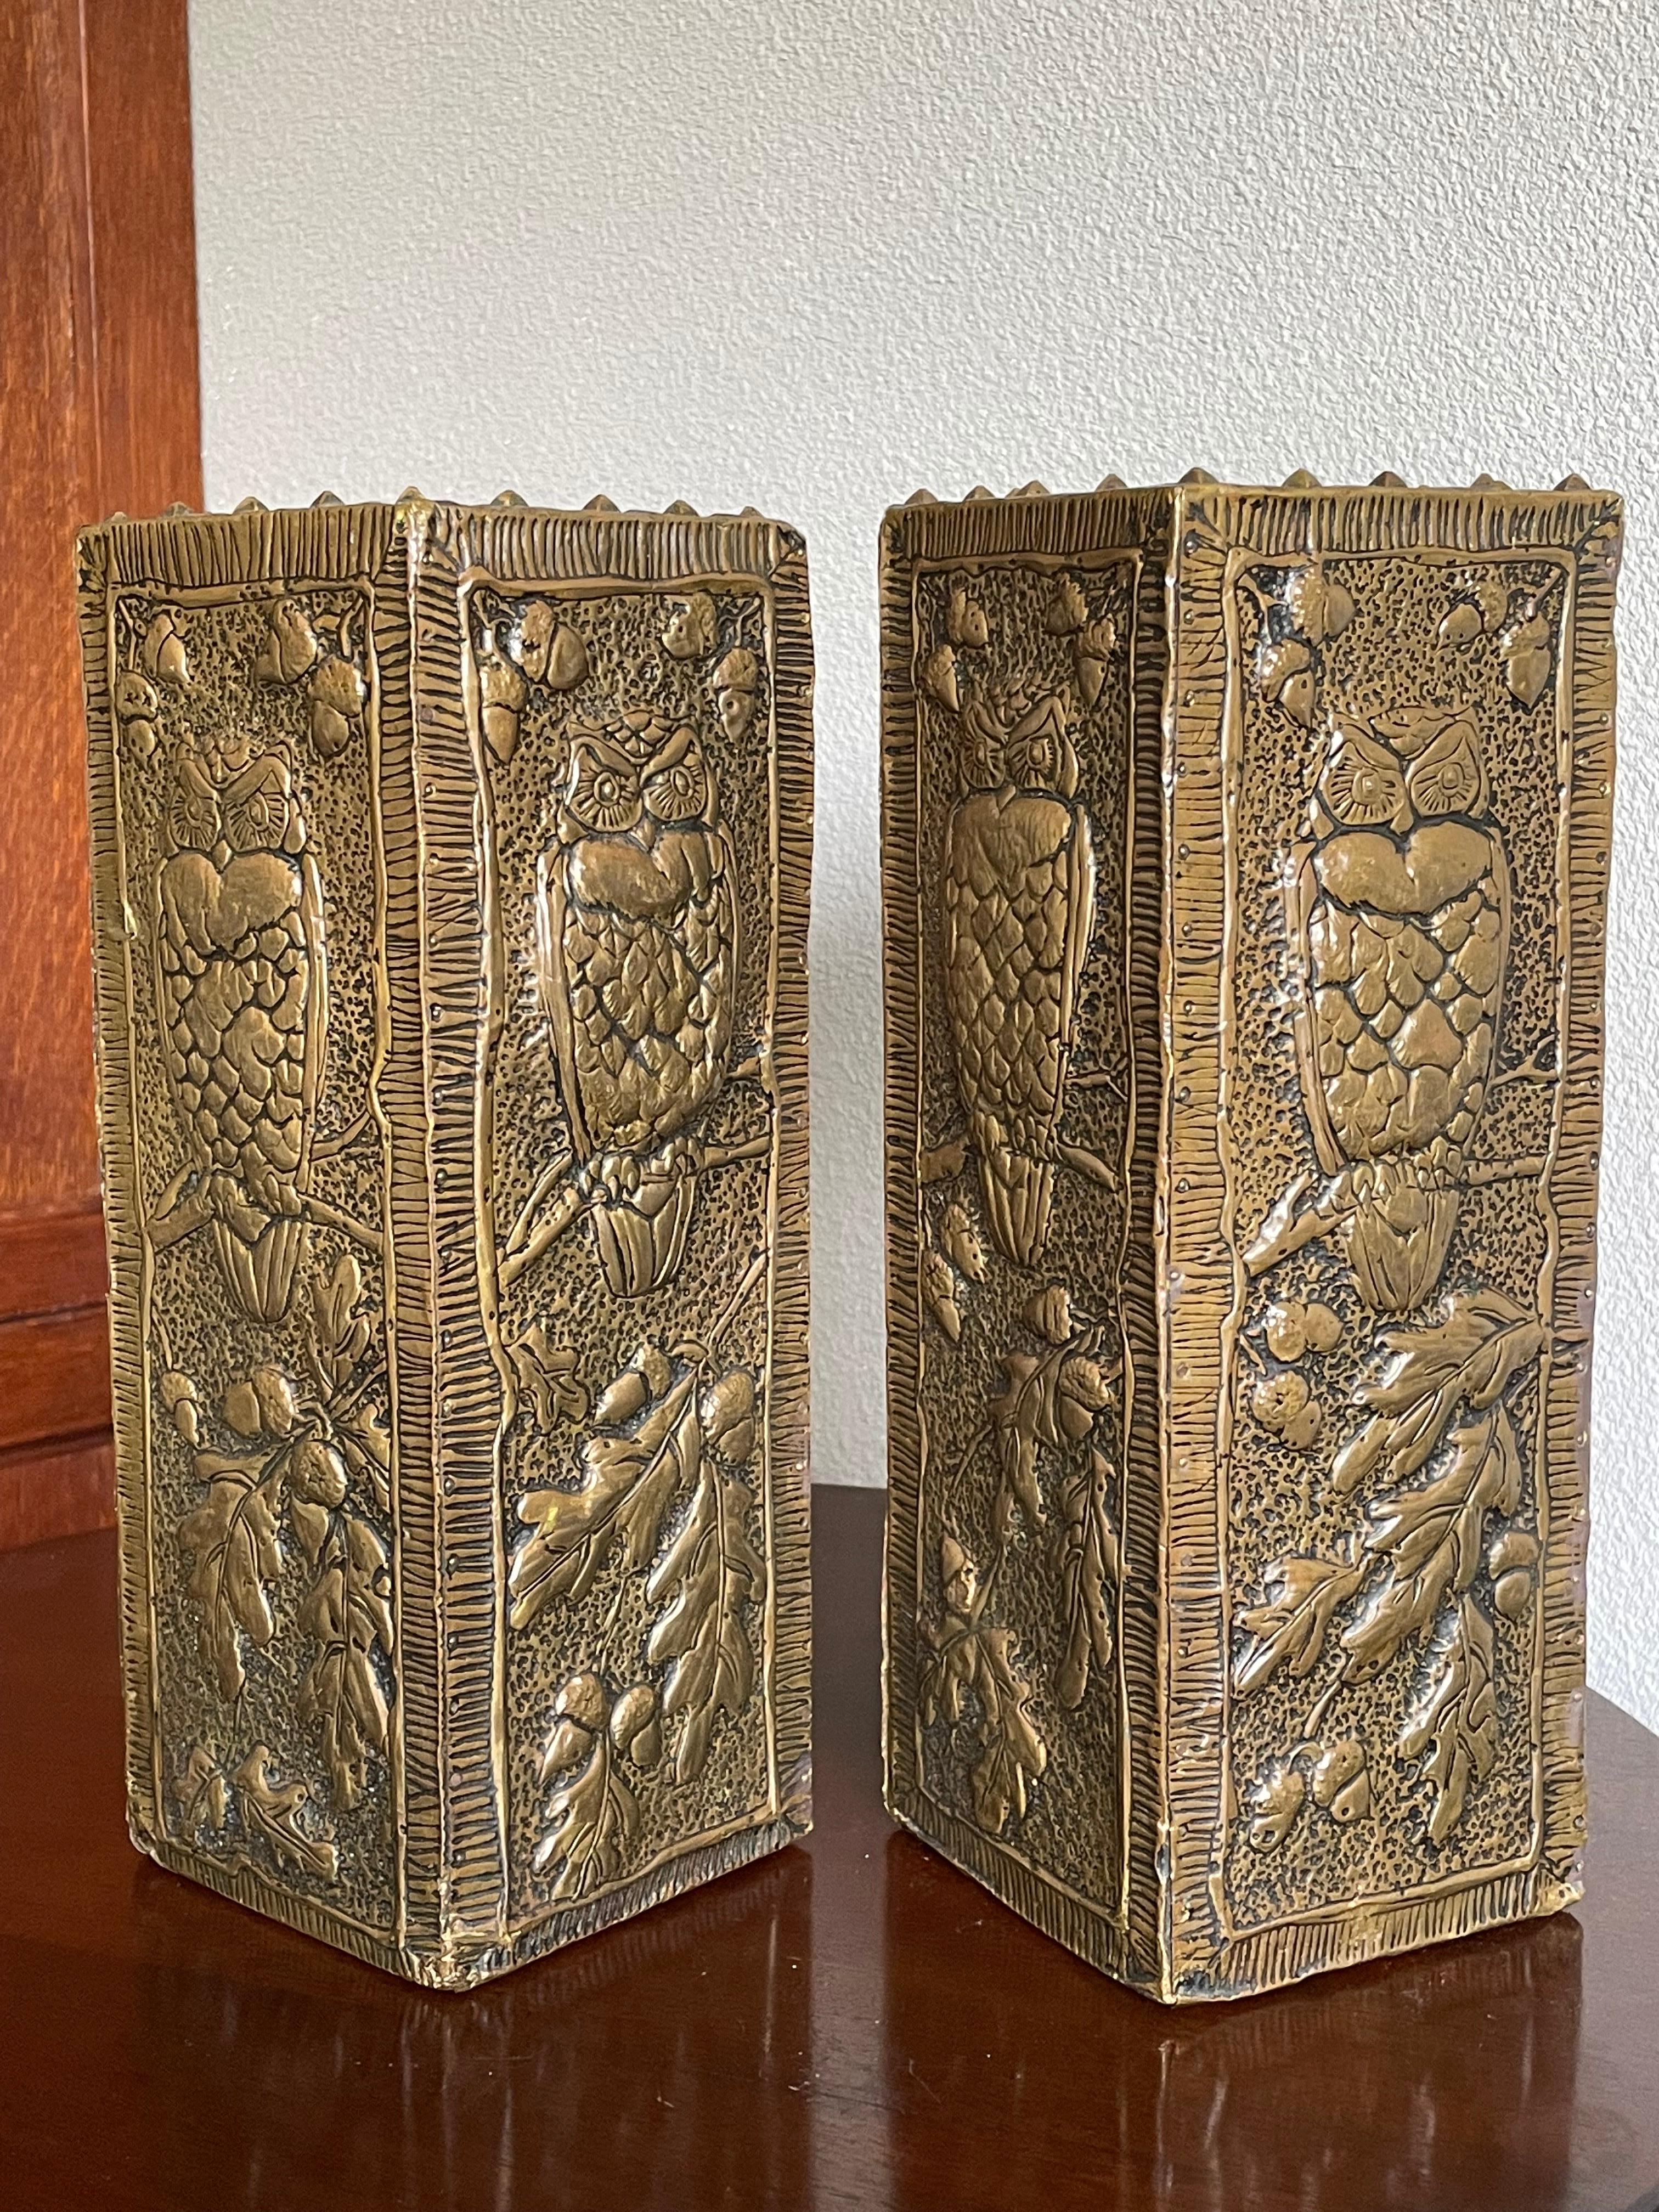 Antique and Unique Arts & Crafts Pair of Embossed Brass Vases w. Owl Sculptures For Sale 3